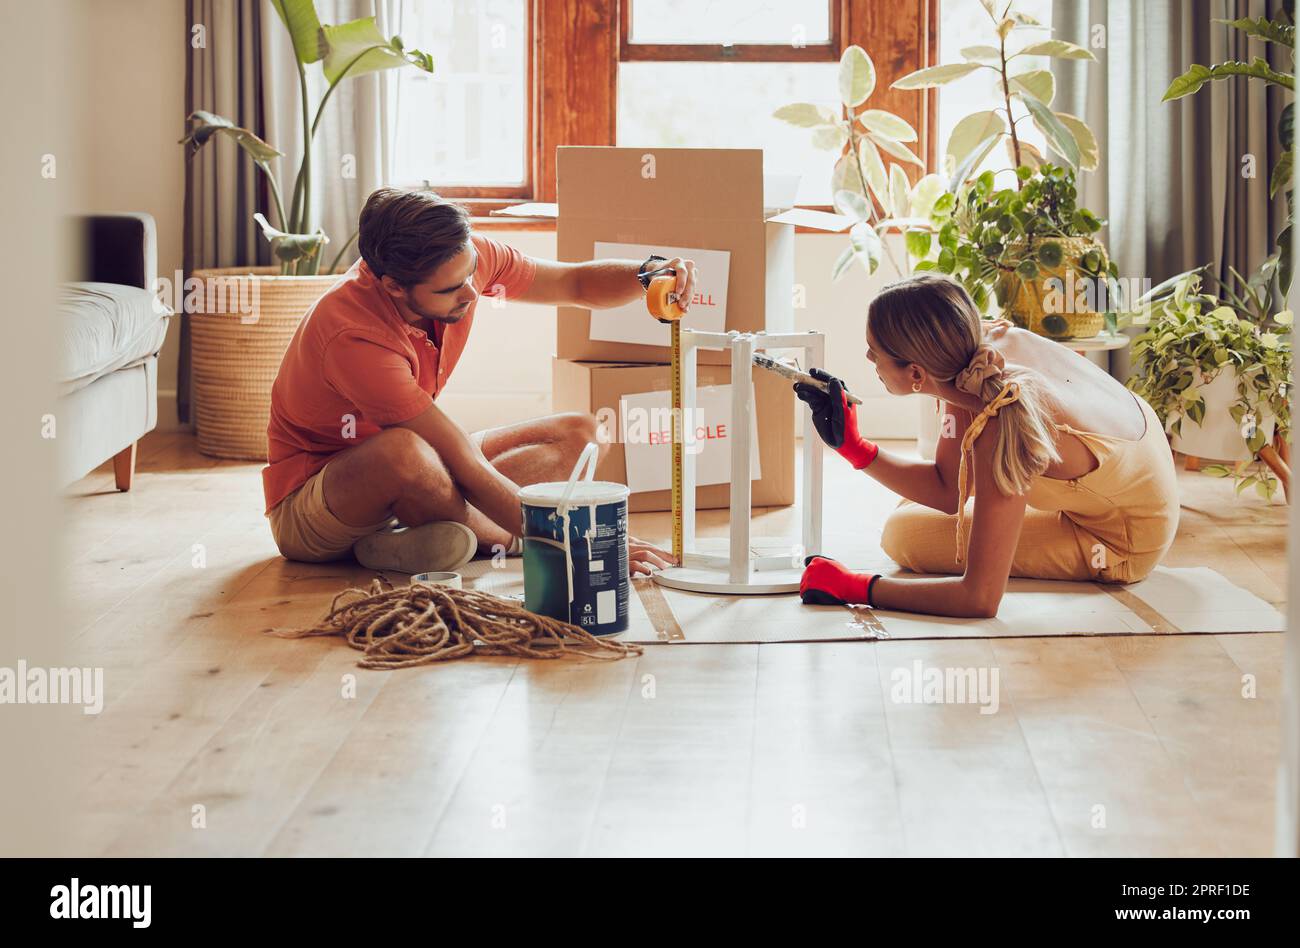 Couple painting wooden table by recycle, donate and thrift furniture for a new home improvement project in new apartment. Creative and DIY man and woman with reusable objects, decorating their house Stock Photo